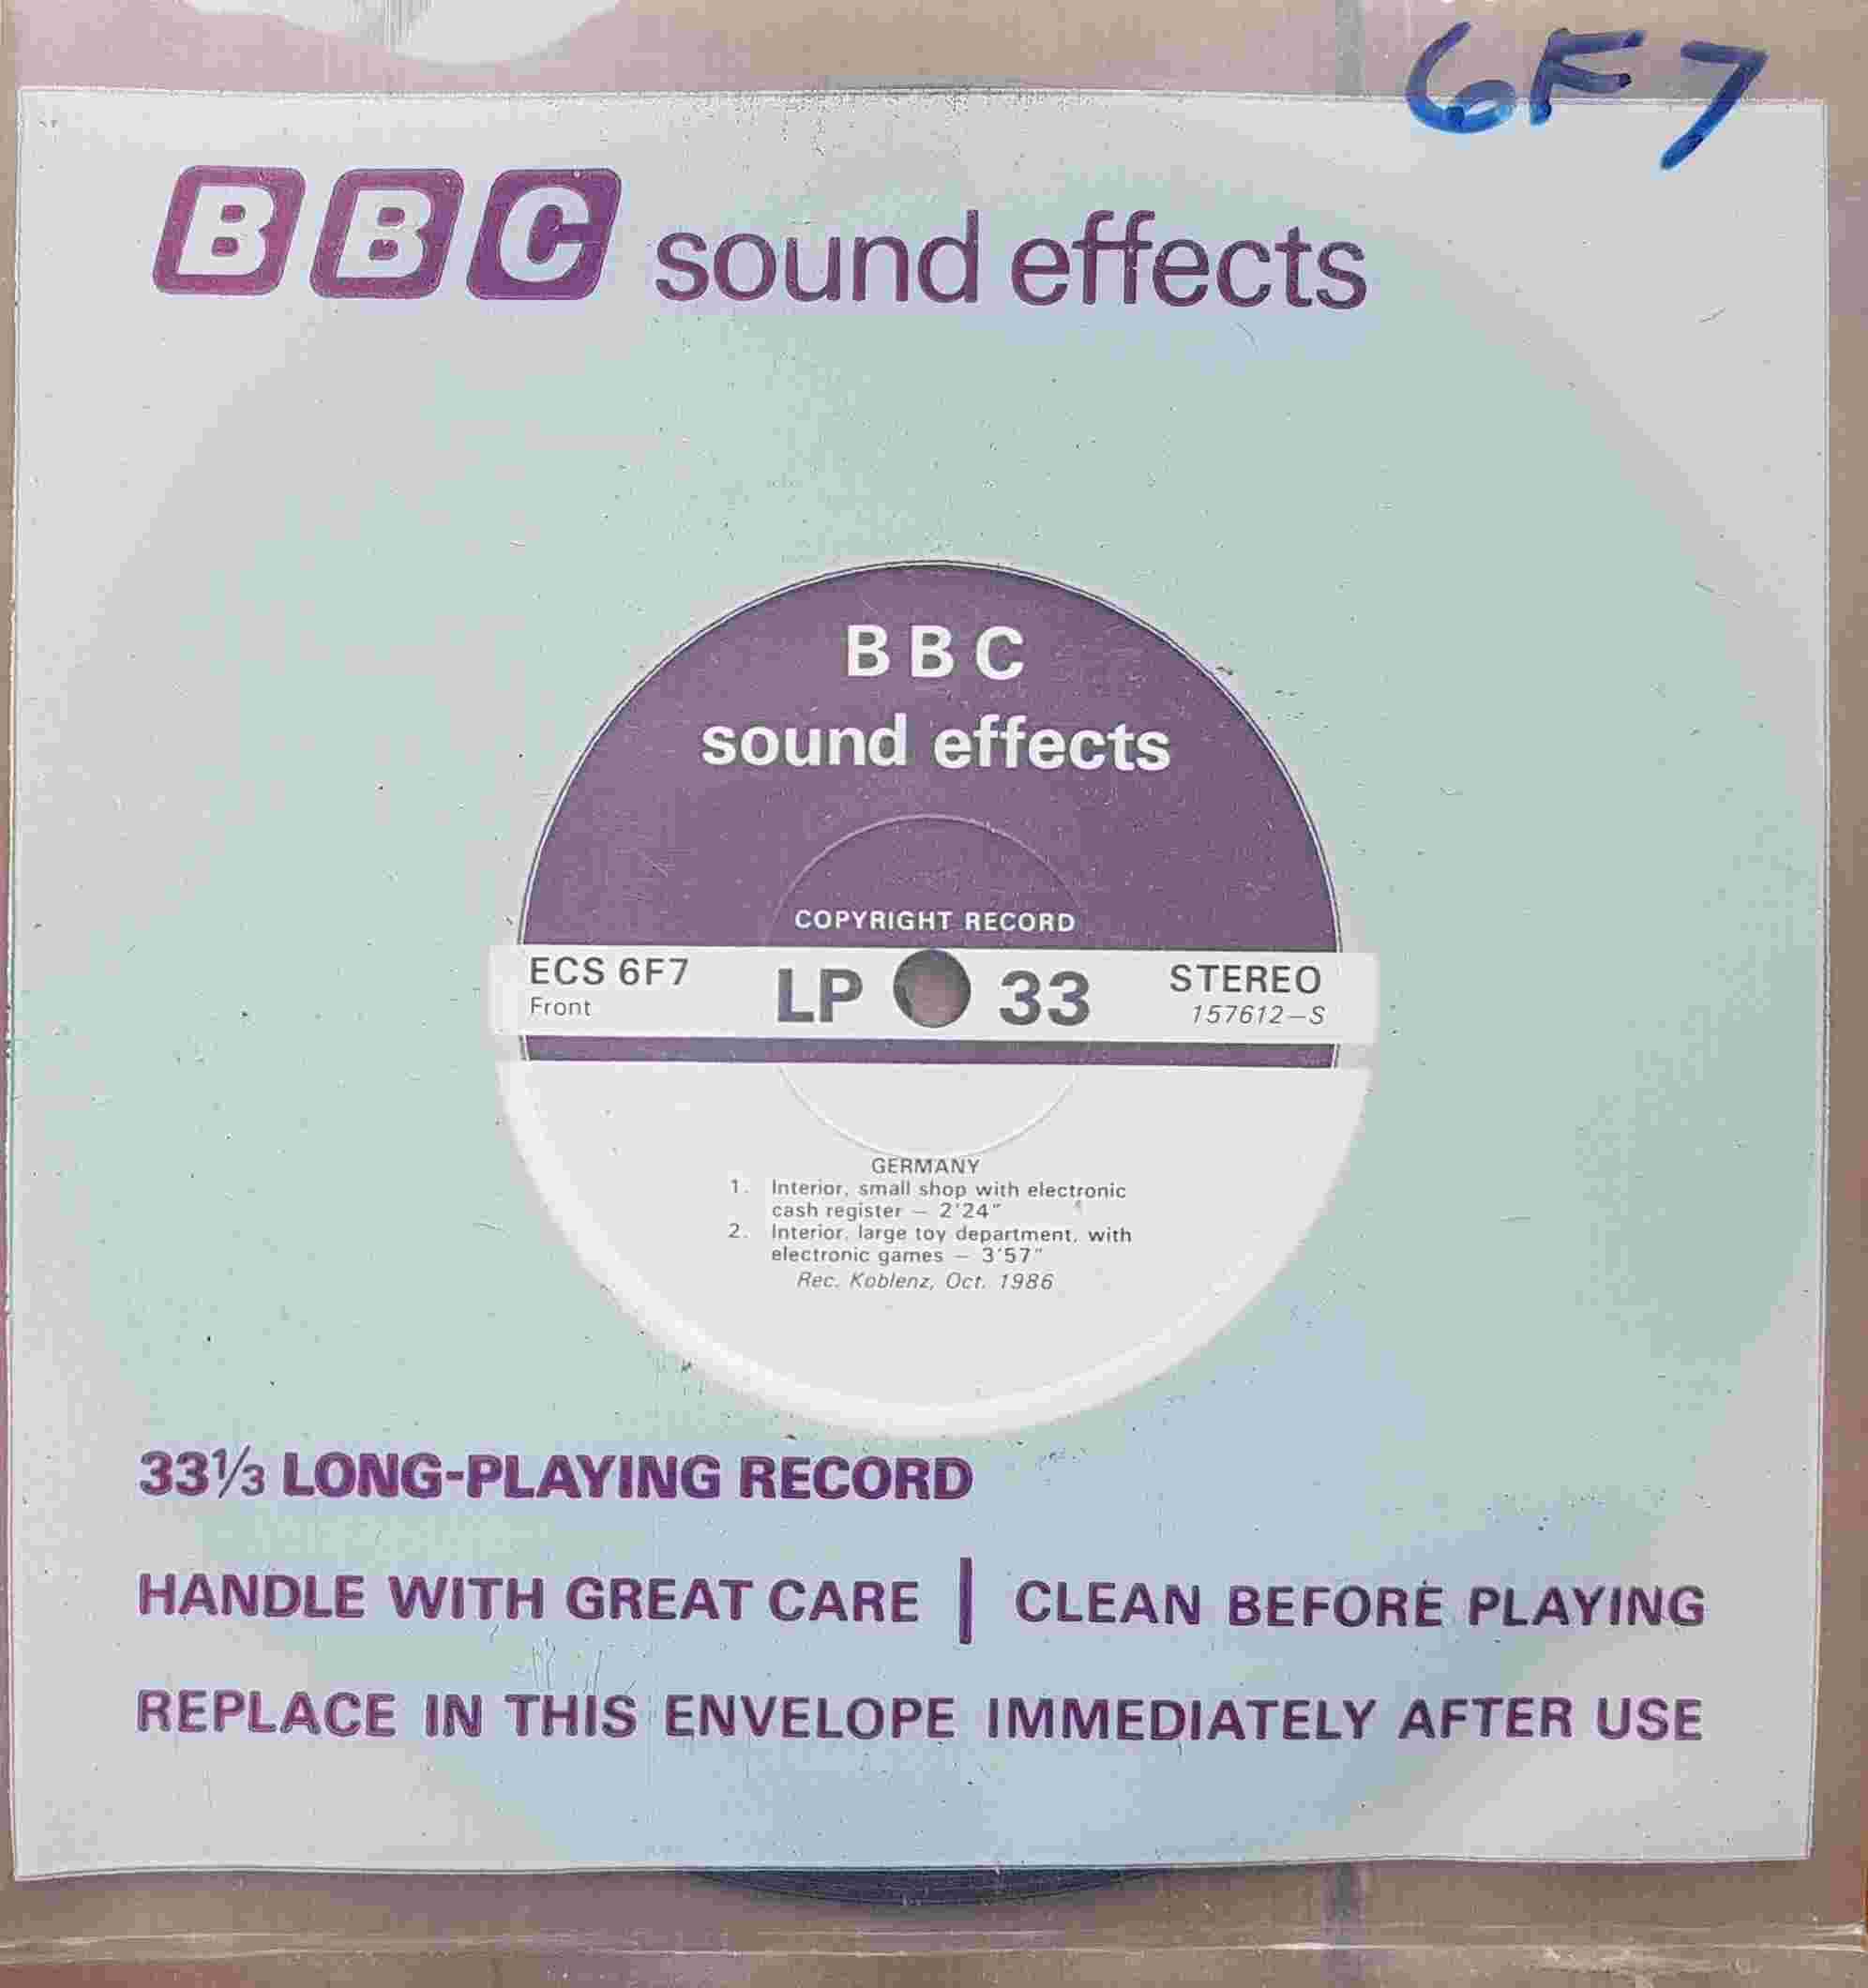 Picture of ECS 6F7 Germany by artist Not registered from the BBC singles - Records and Tapes library